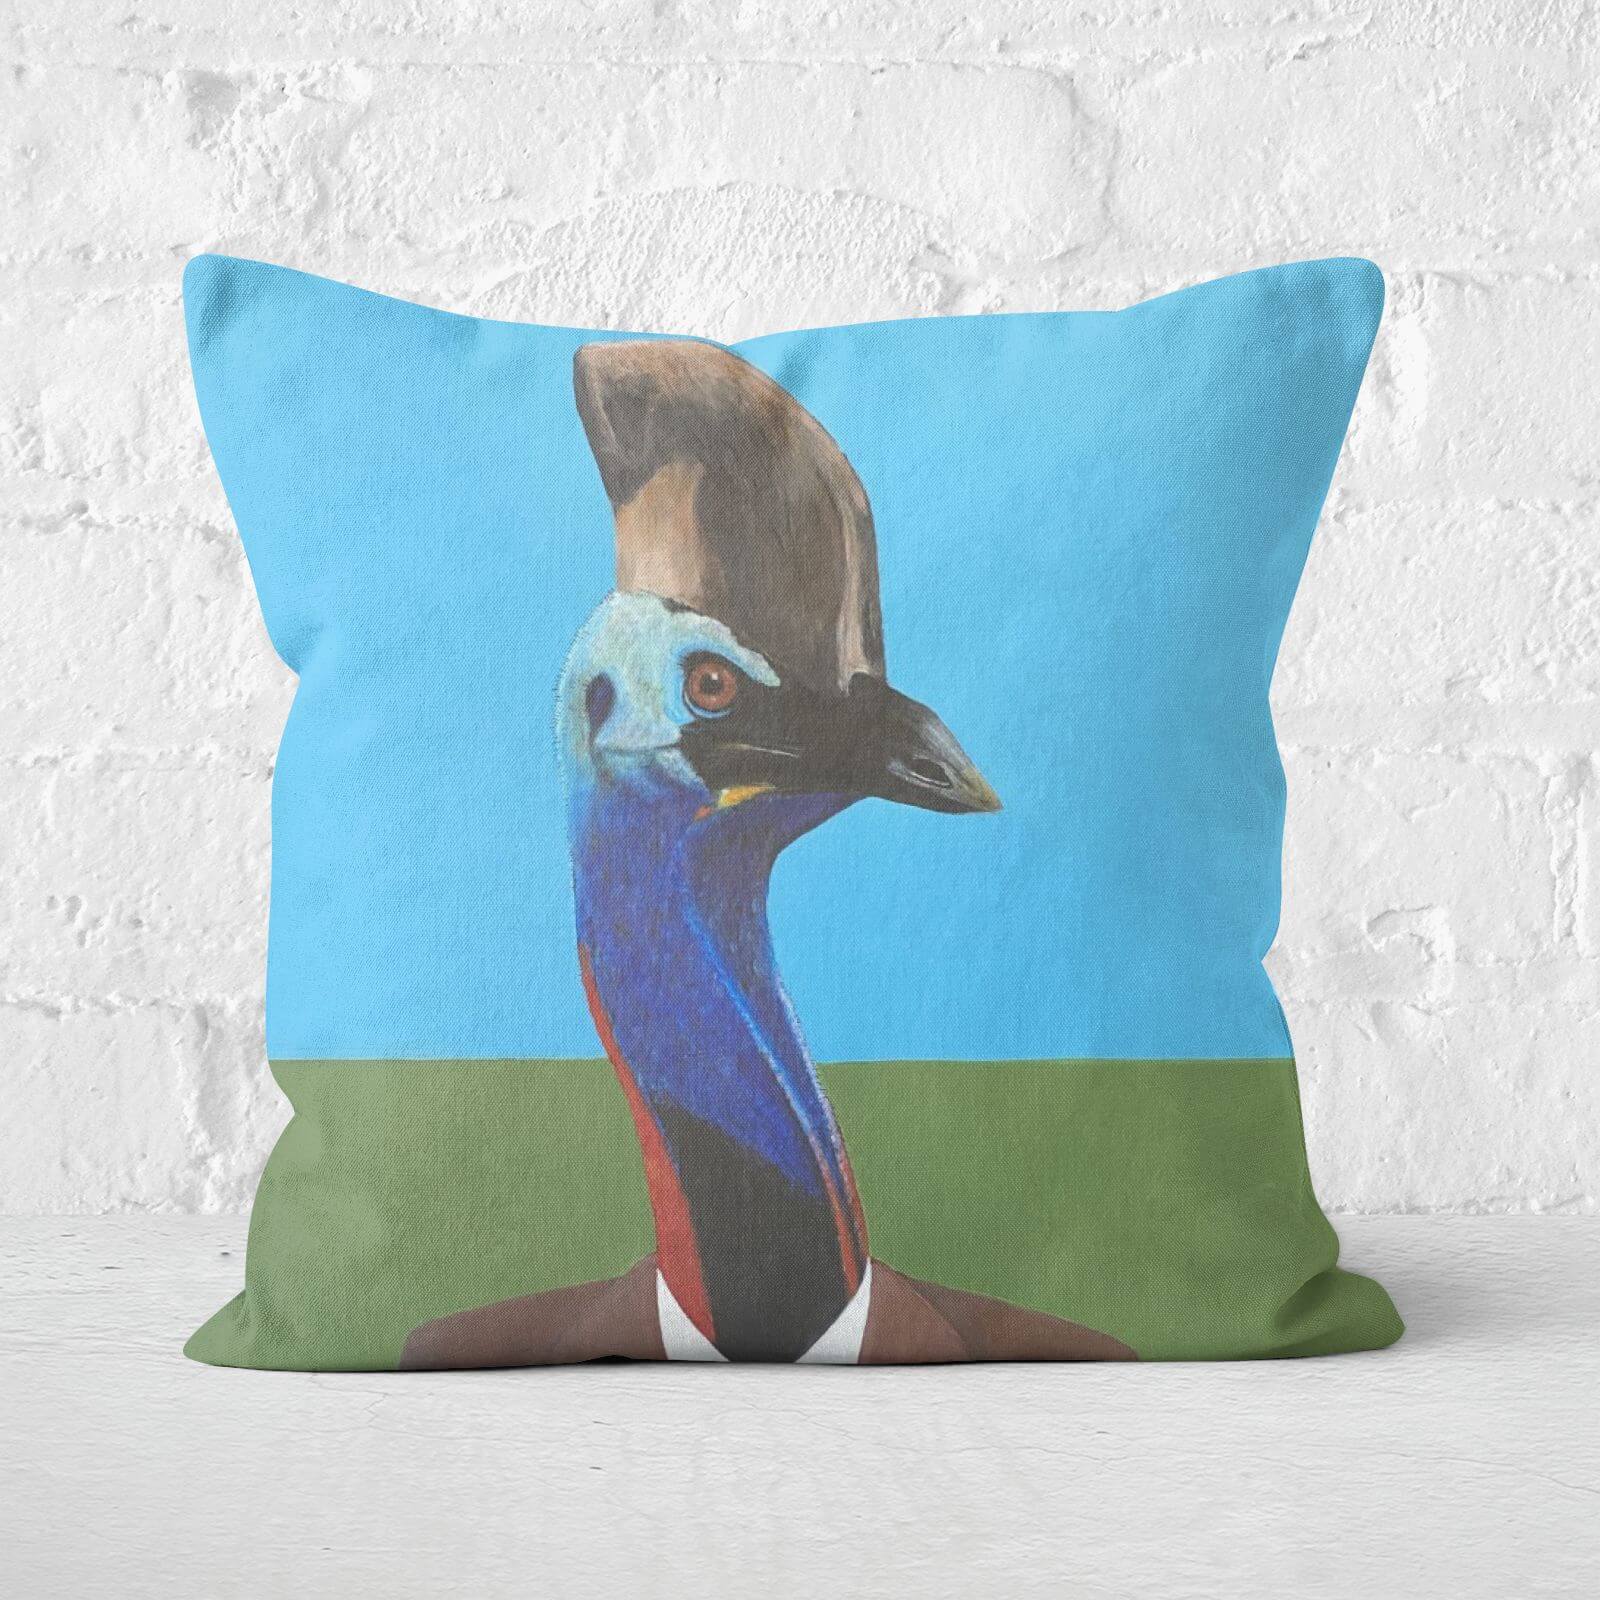 Cassowary In Suit Square Cushion - 40x40cm - Soft Touch